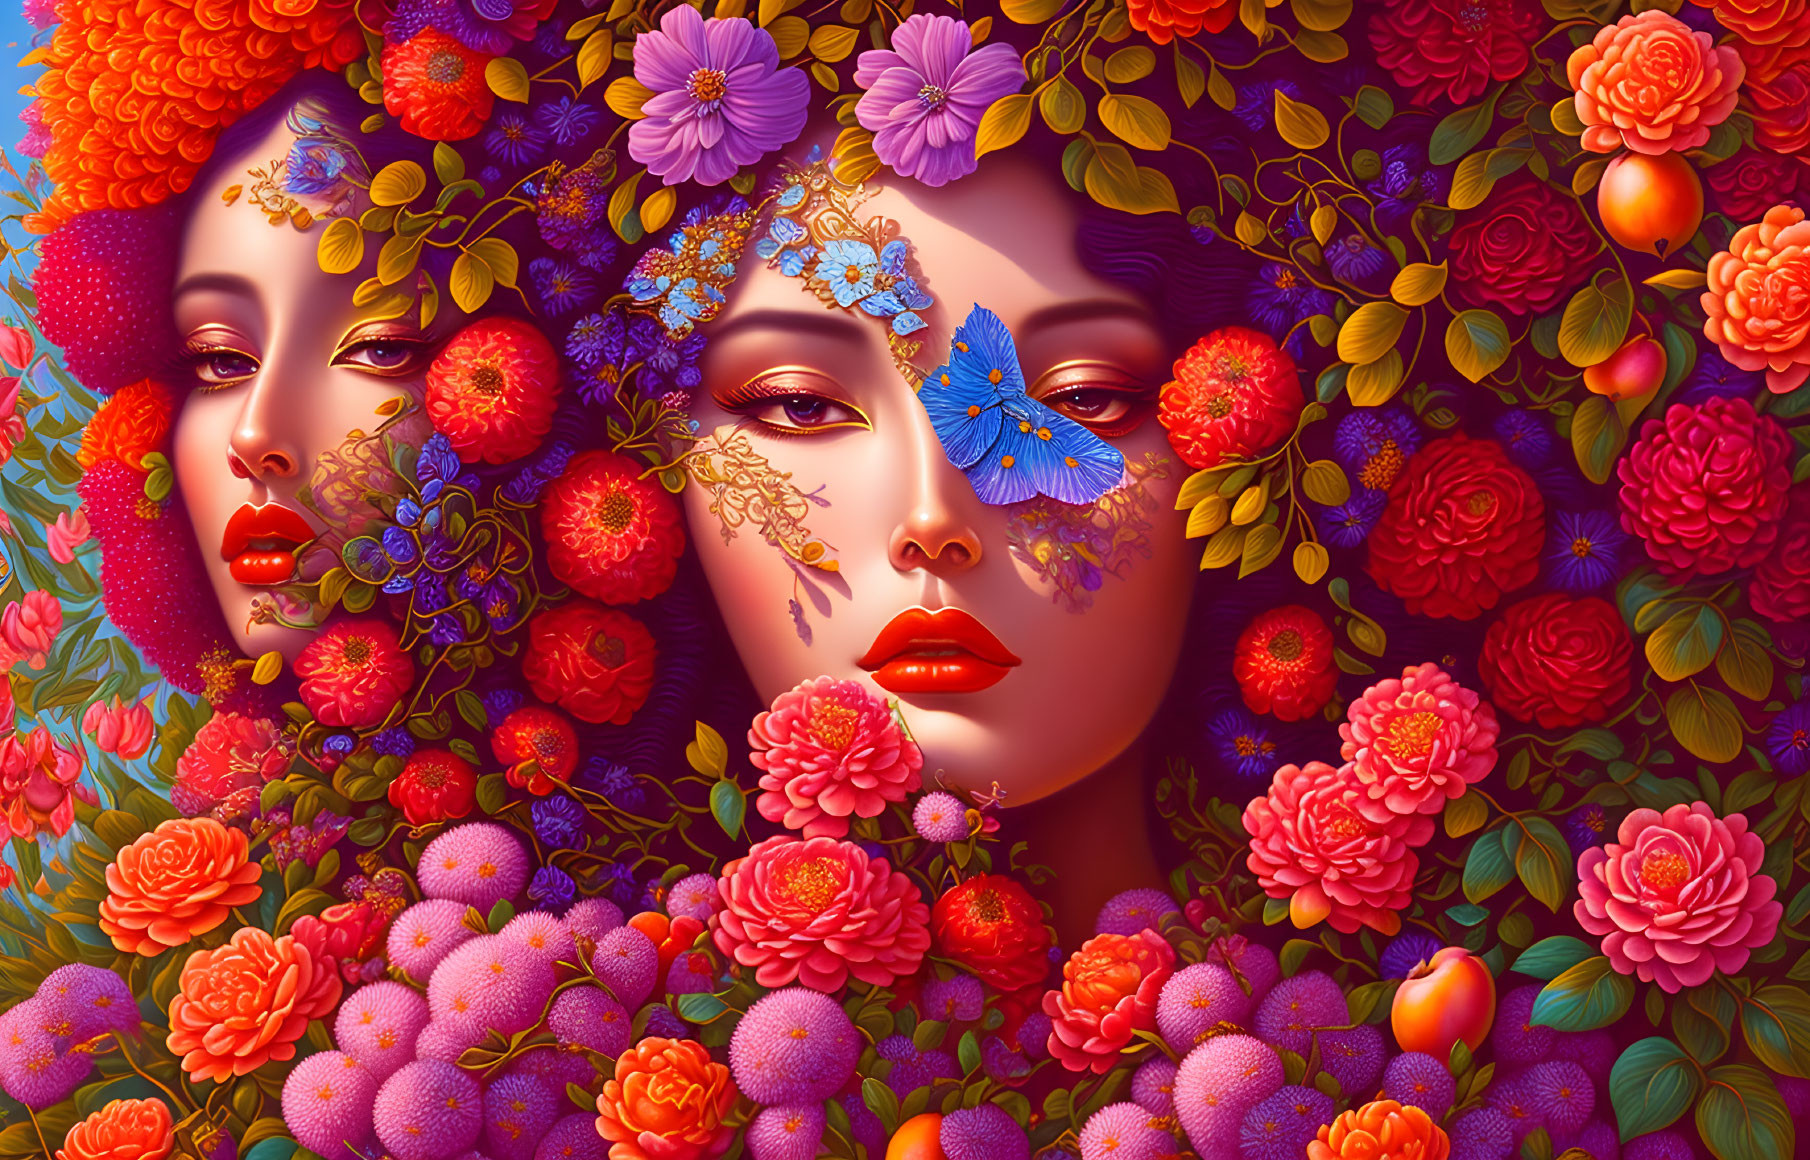 Colorful Artwork of Two Female Figures with Flowers, Fruits, and Butterfly